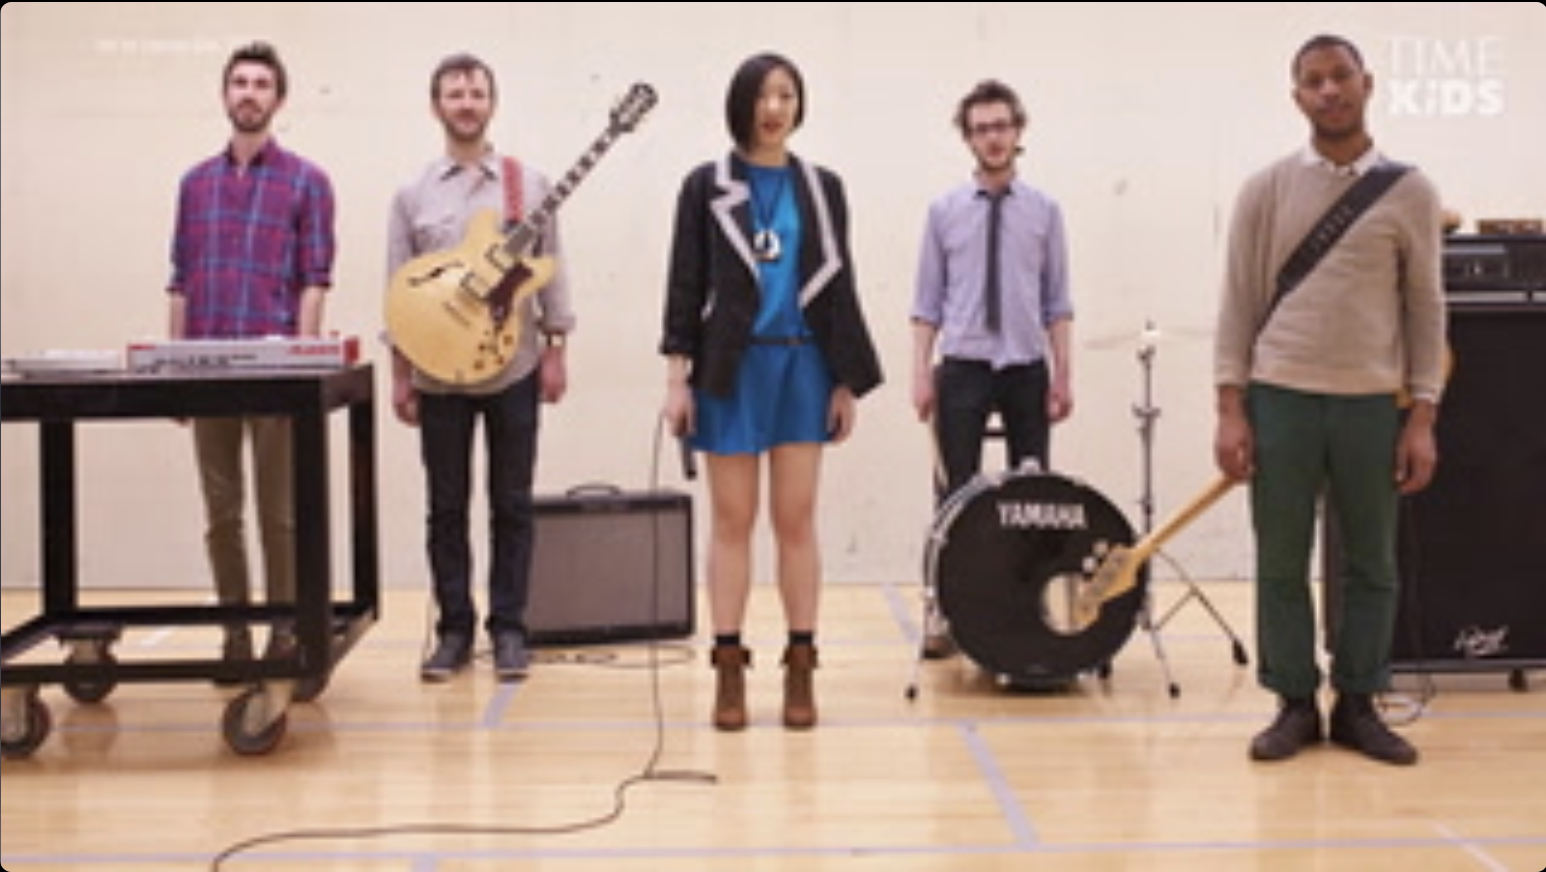 Young Jean Lee holding a microphone standing dead center flanked by two band members on her left side and two band members on her right side as they pose with instruments.